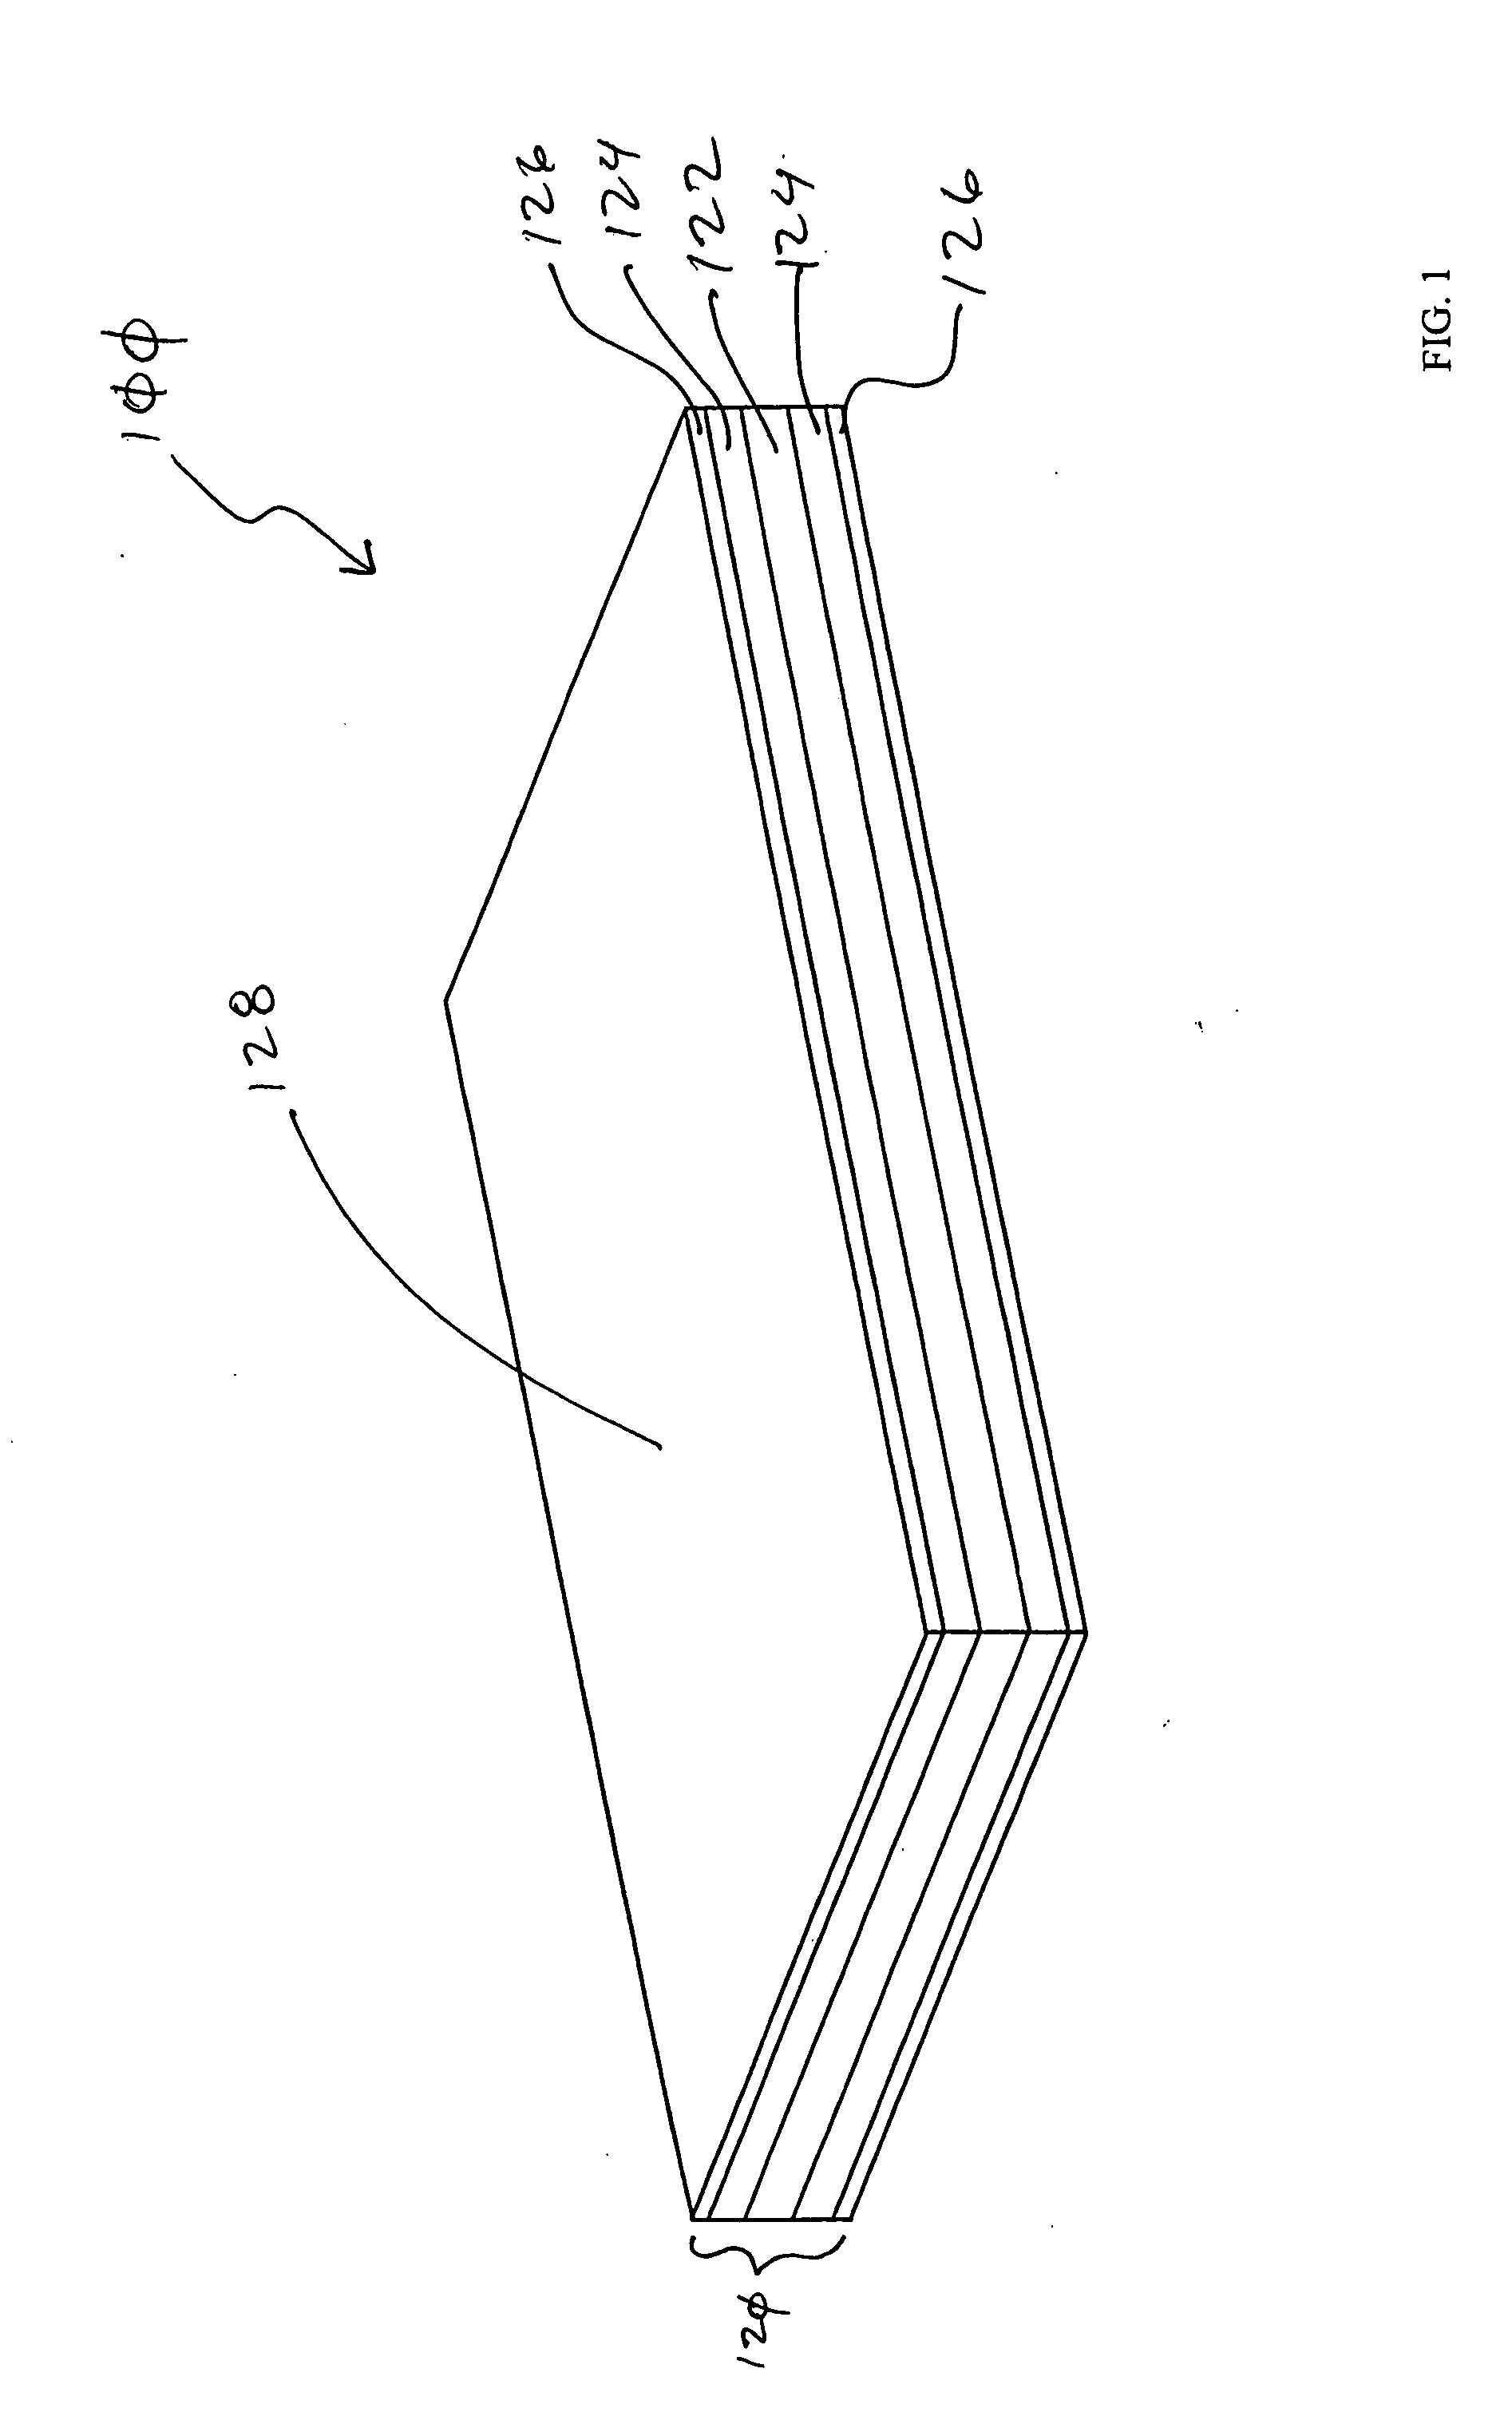 Spinal tension and pressure relieving body support apparatus